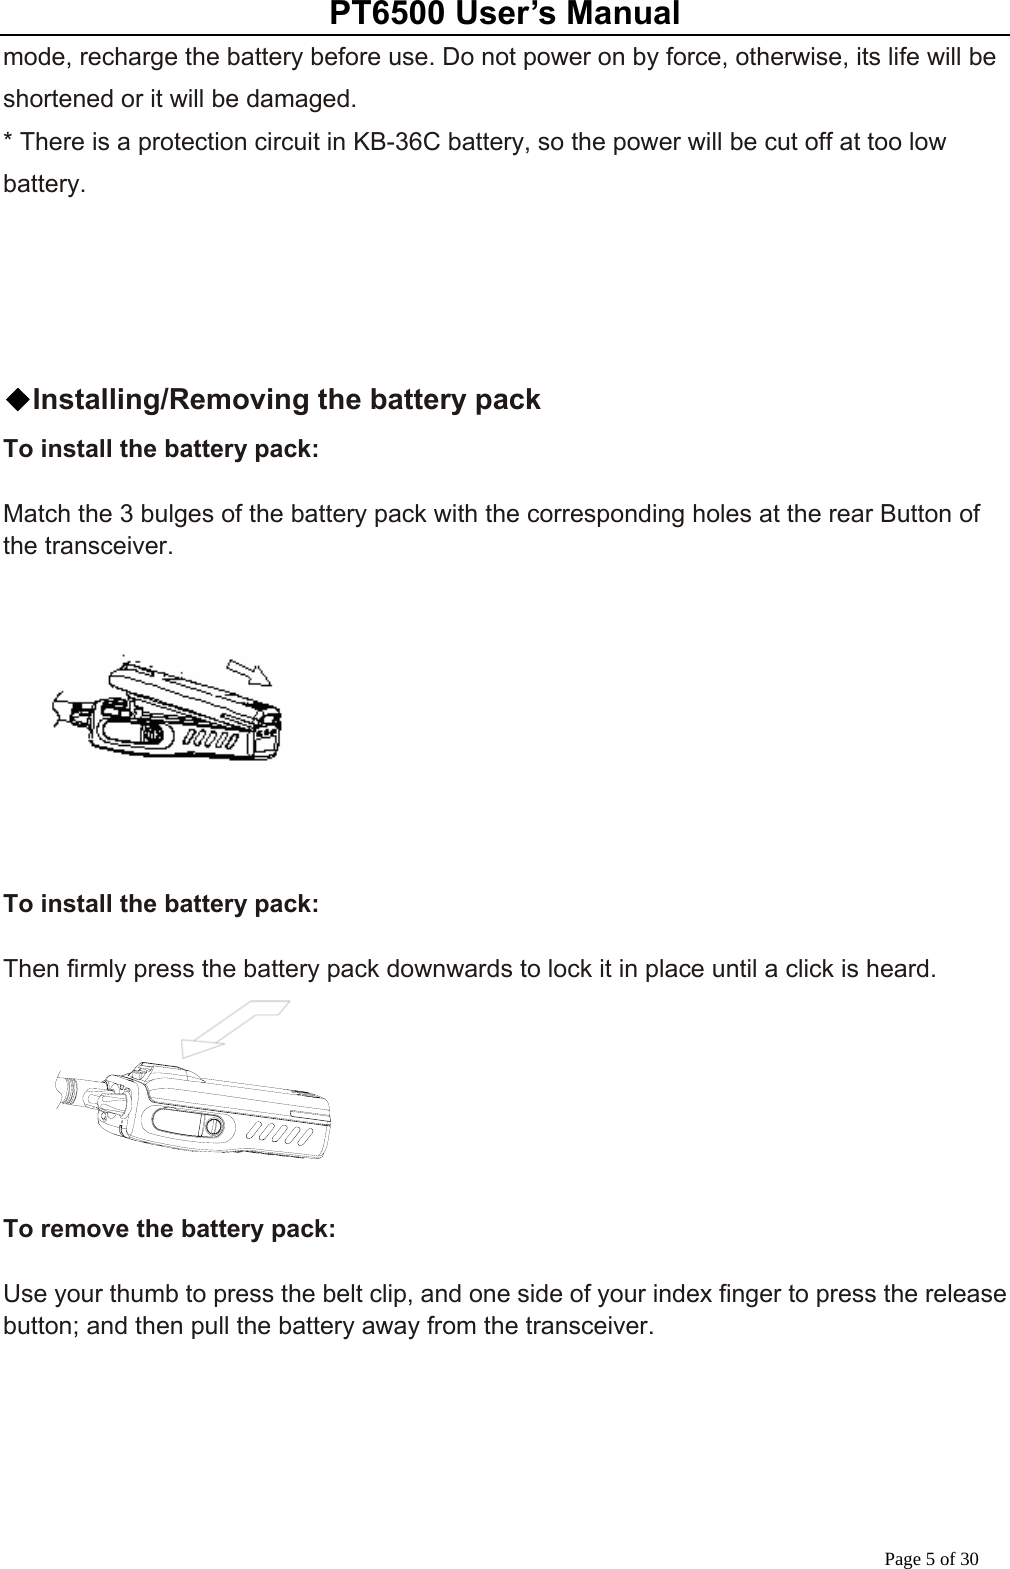 PT6500 User’s Manual Page 5 of 30 mode, recharge the battery before use. Do not power on by force, otherwise, its life will be shortened or it will be damaged.   * There is a protection circuit in KB-36C battery, so the power will be cut off at too low battery.      ◆Installing/Removing the battery pack To install the battery pack:  Match the 3 bulges of the battery pack with the corresponding holes at the rear Button of the transceiver.        To install the battery pack:  Then firmly press the battery pack downwards to lock it in place until a click is heard.       To remove the battery pack:  Use your thumb to press the belt clip, and one side of your index finger to press the release button; and then pull the battery away from the transceiver.       